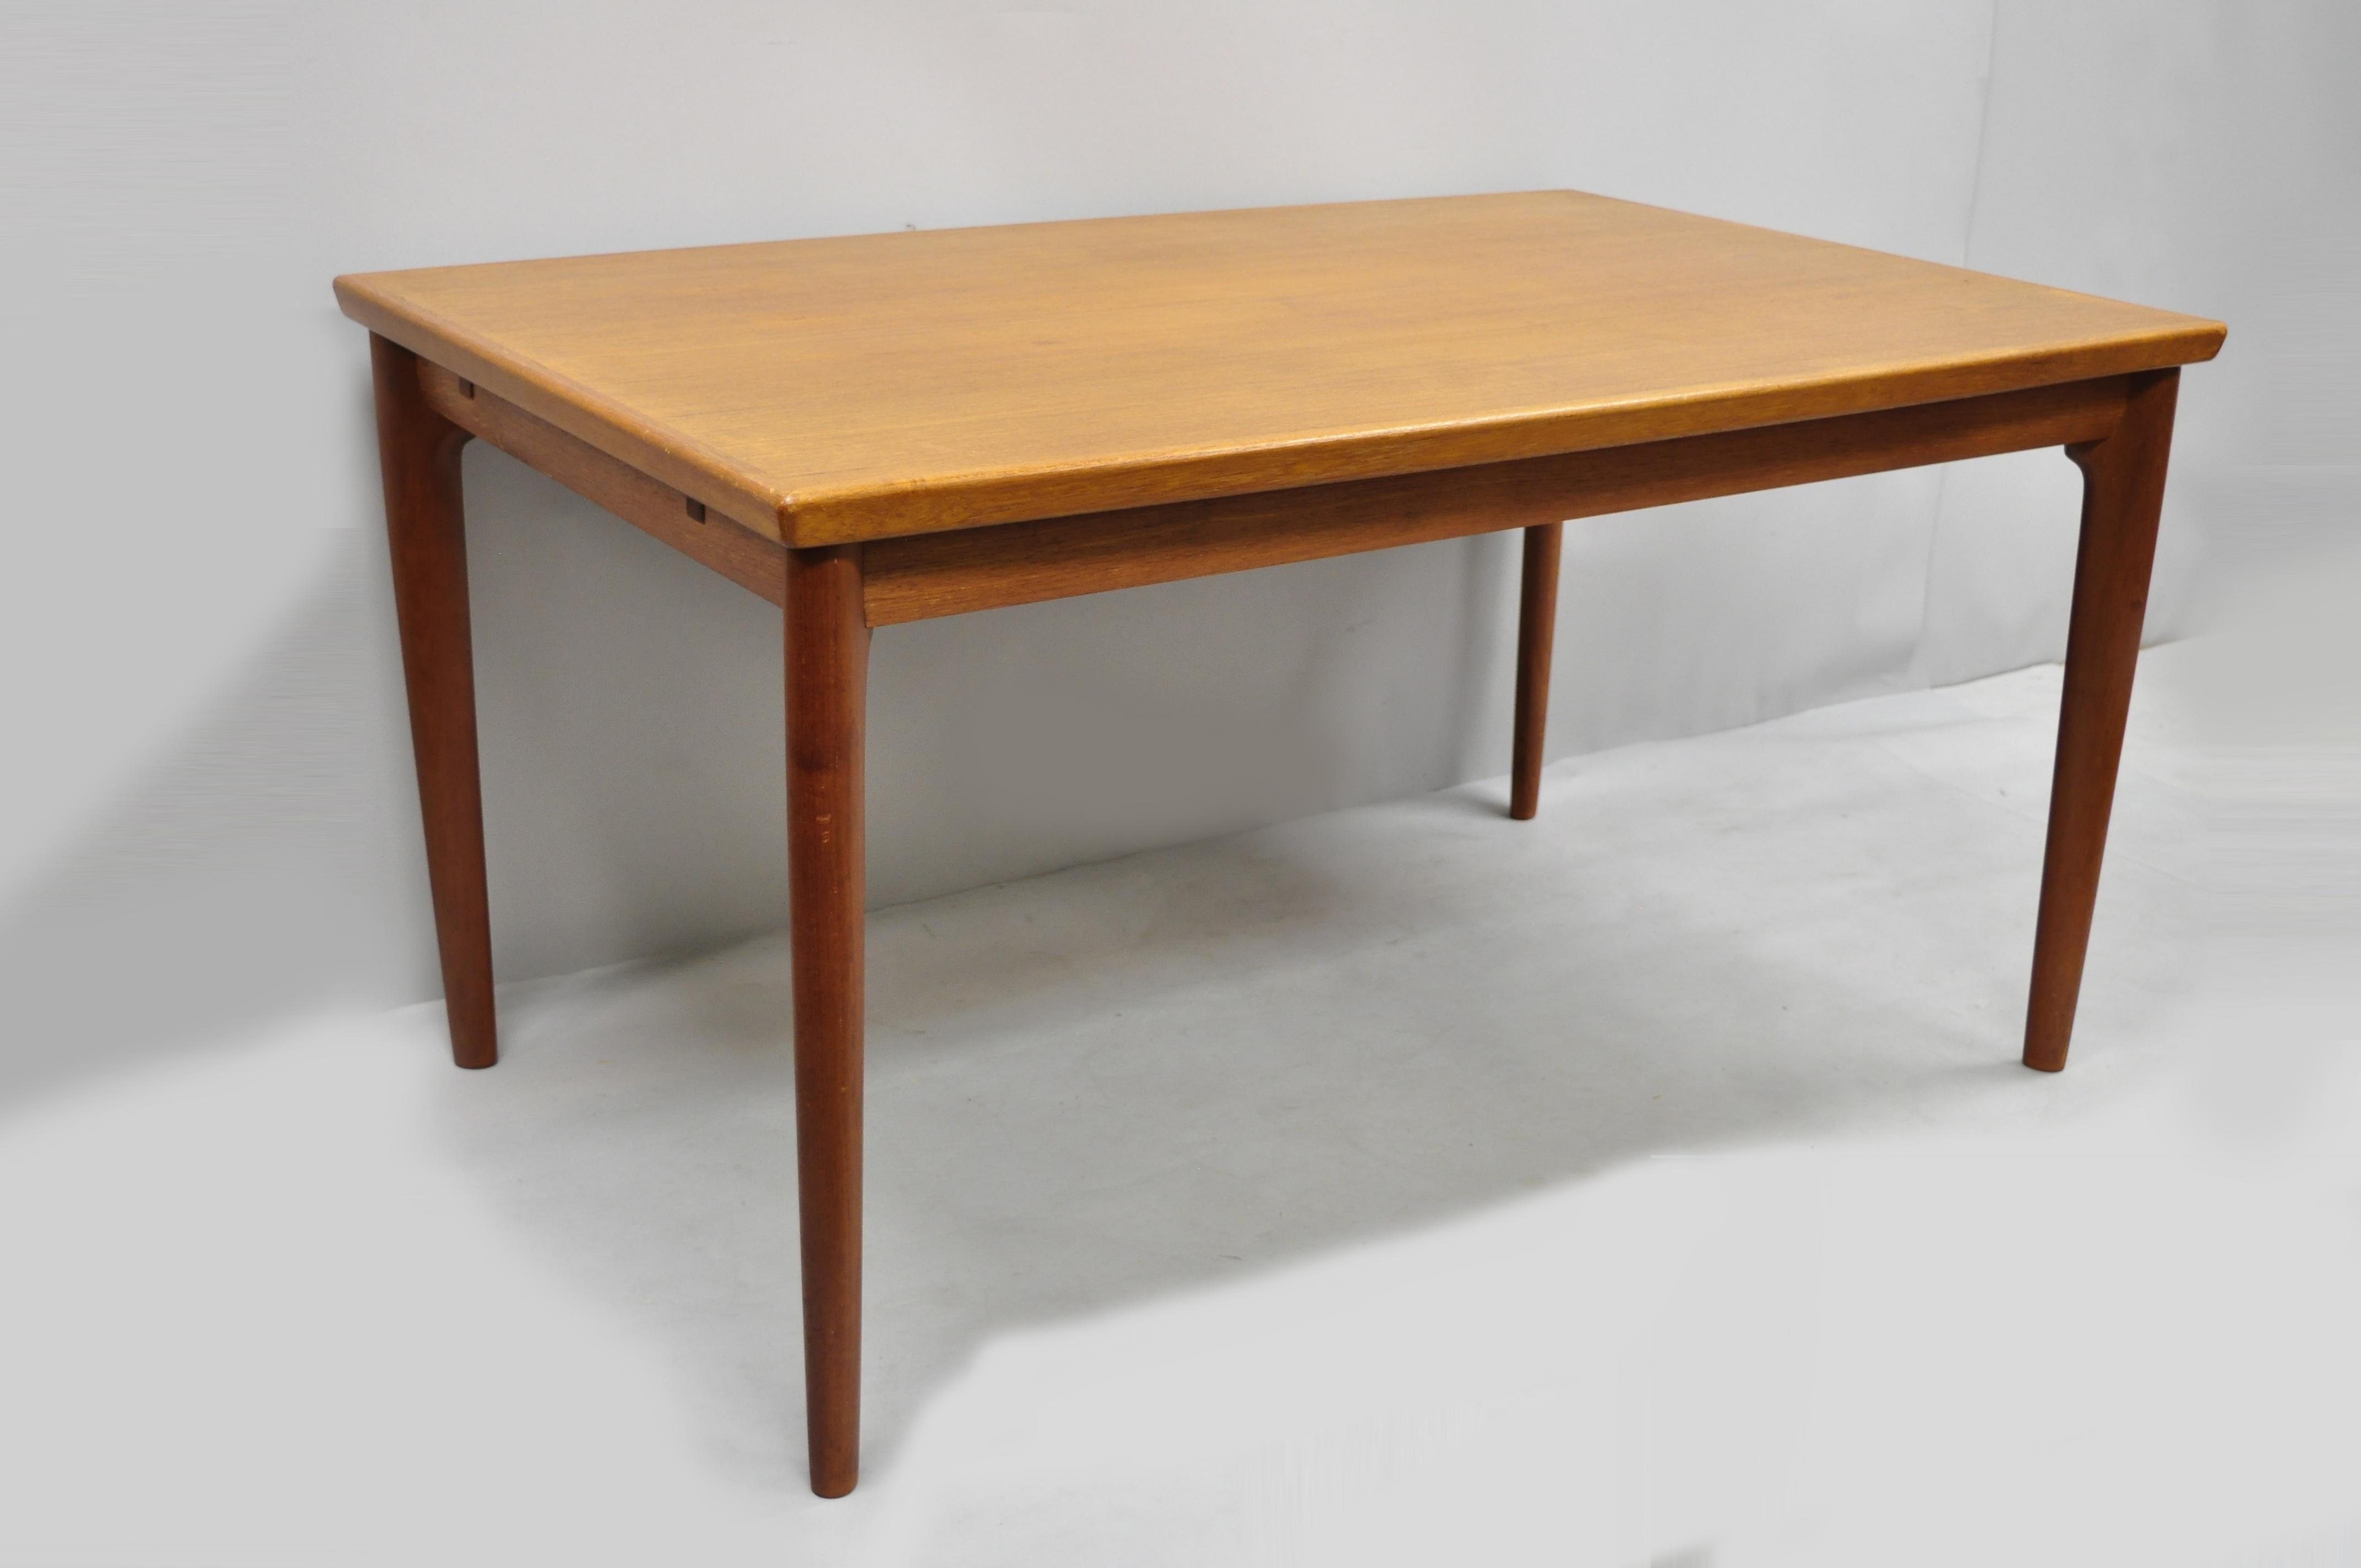 Mid century danish modern extending teak dining table. Item features 2 pull out extensions, beautiful wood grain, tapered legs, clean modernist lines, quality Danish craftsmanship, circa 1960s. Measurements: 29